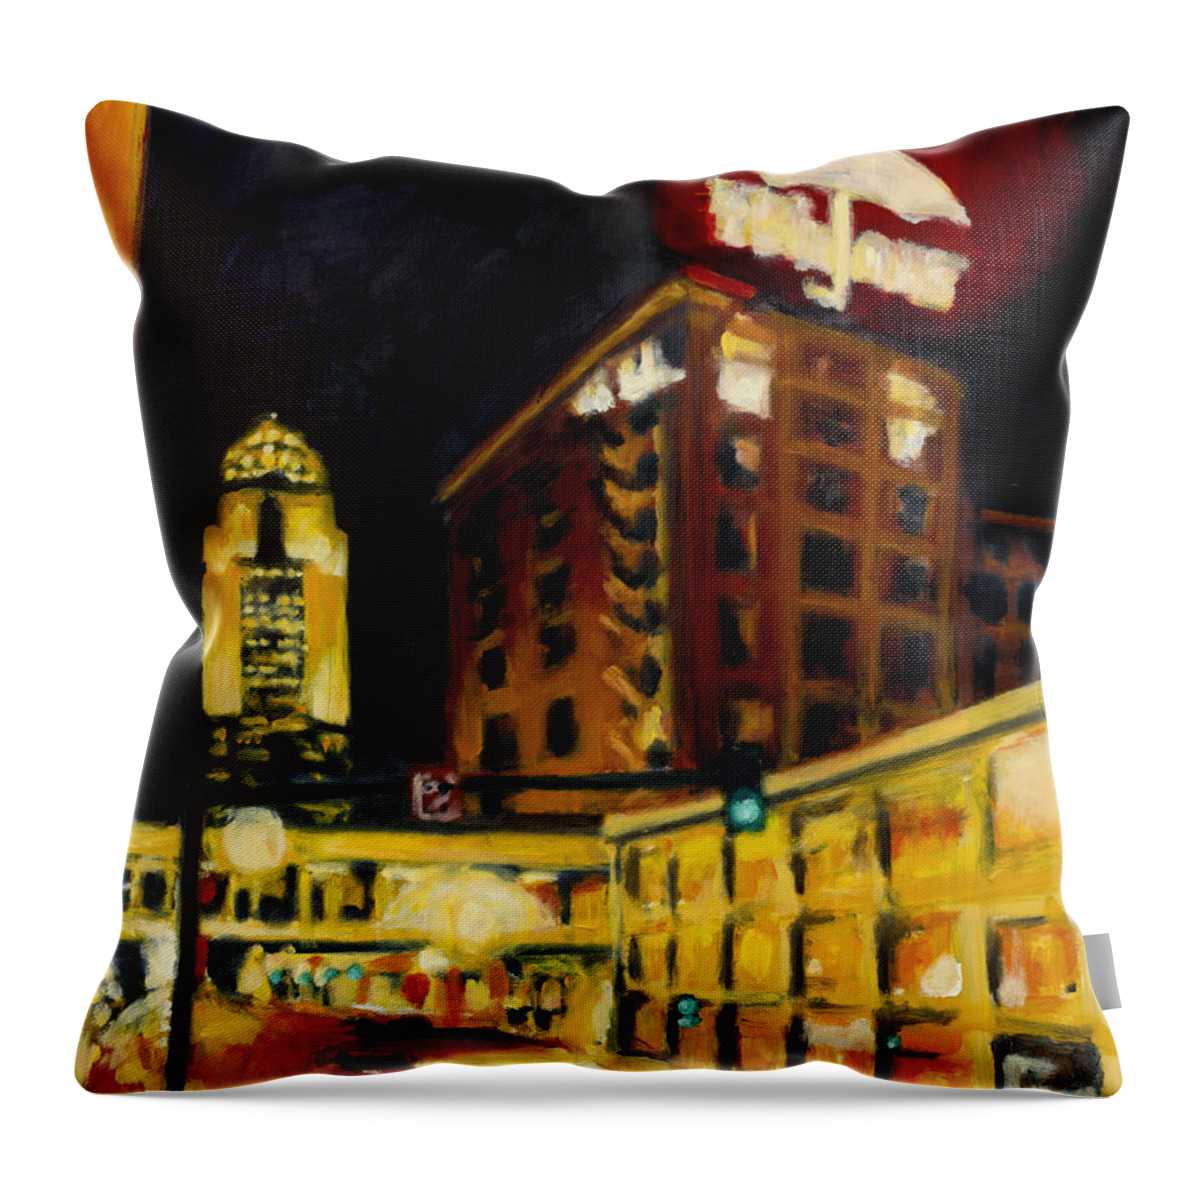 Rob Reeves Throw Pillow featuring the painting Untitled in Red and gold by Robert Reeves